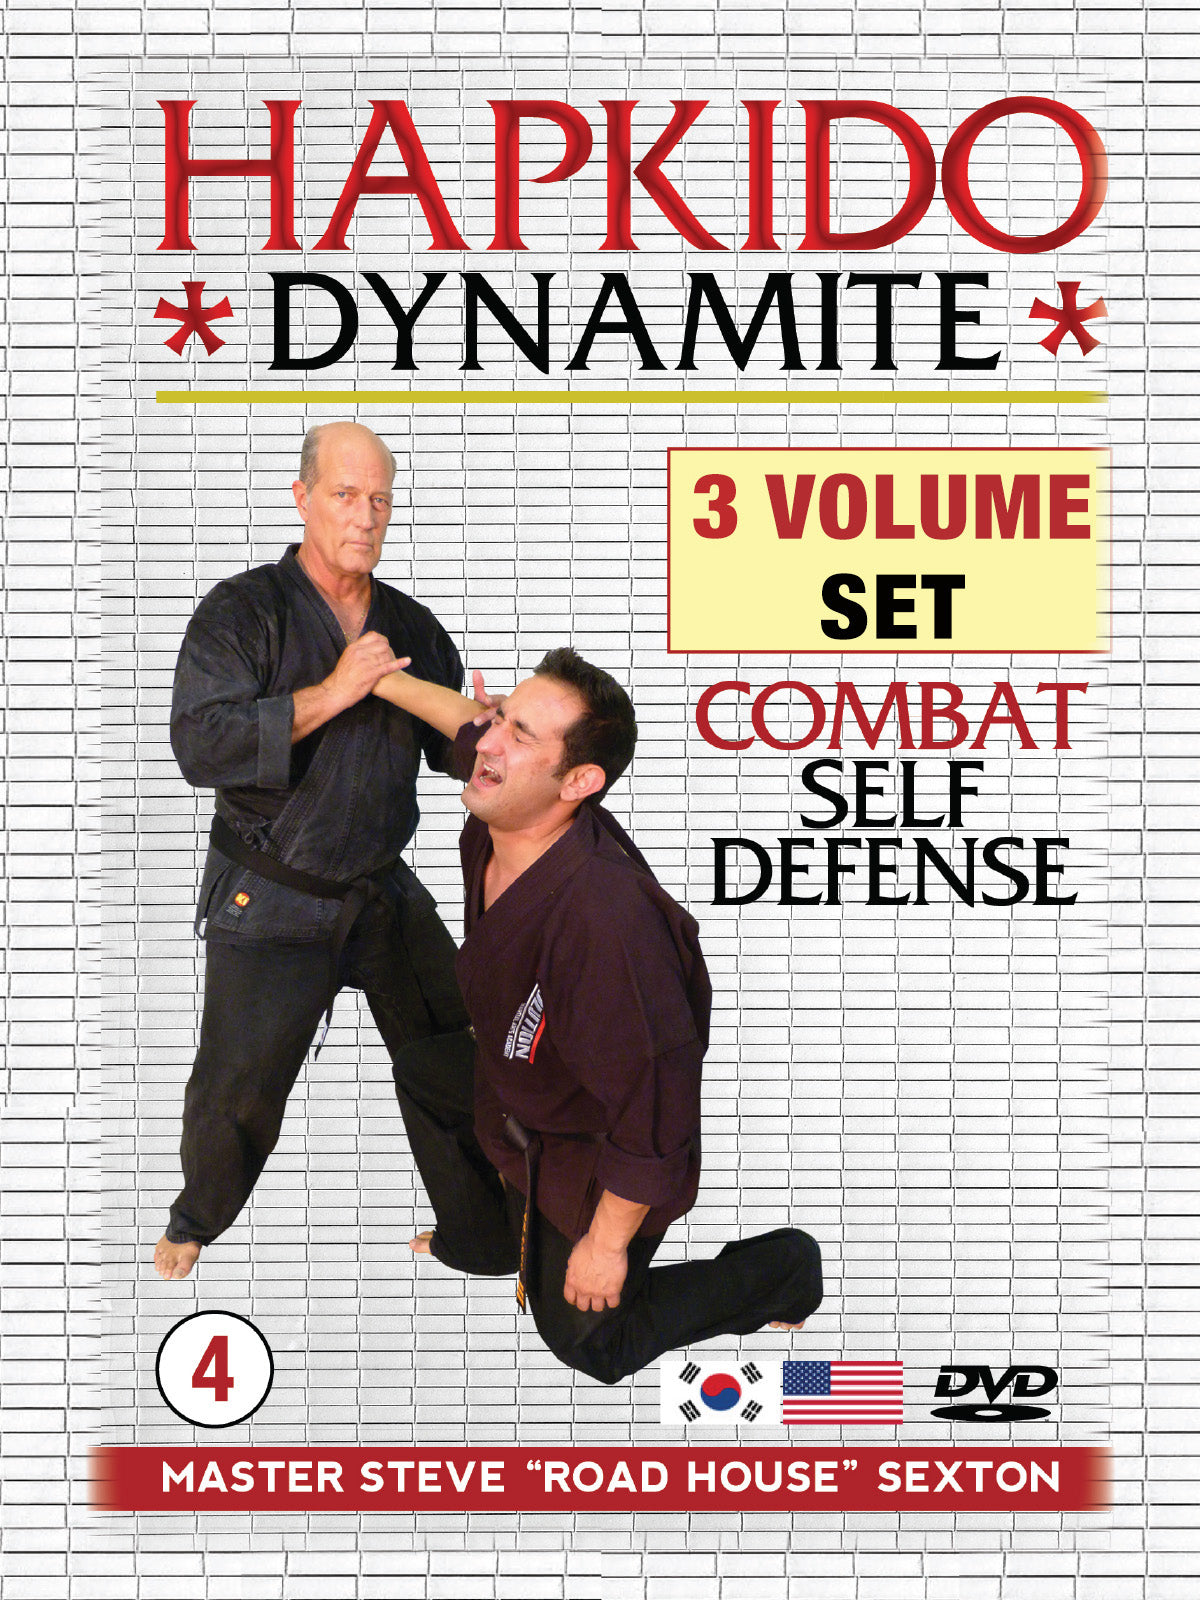 Hapkido Dynamite by Steve Roadhouse Sexton (On Demand)